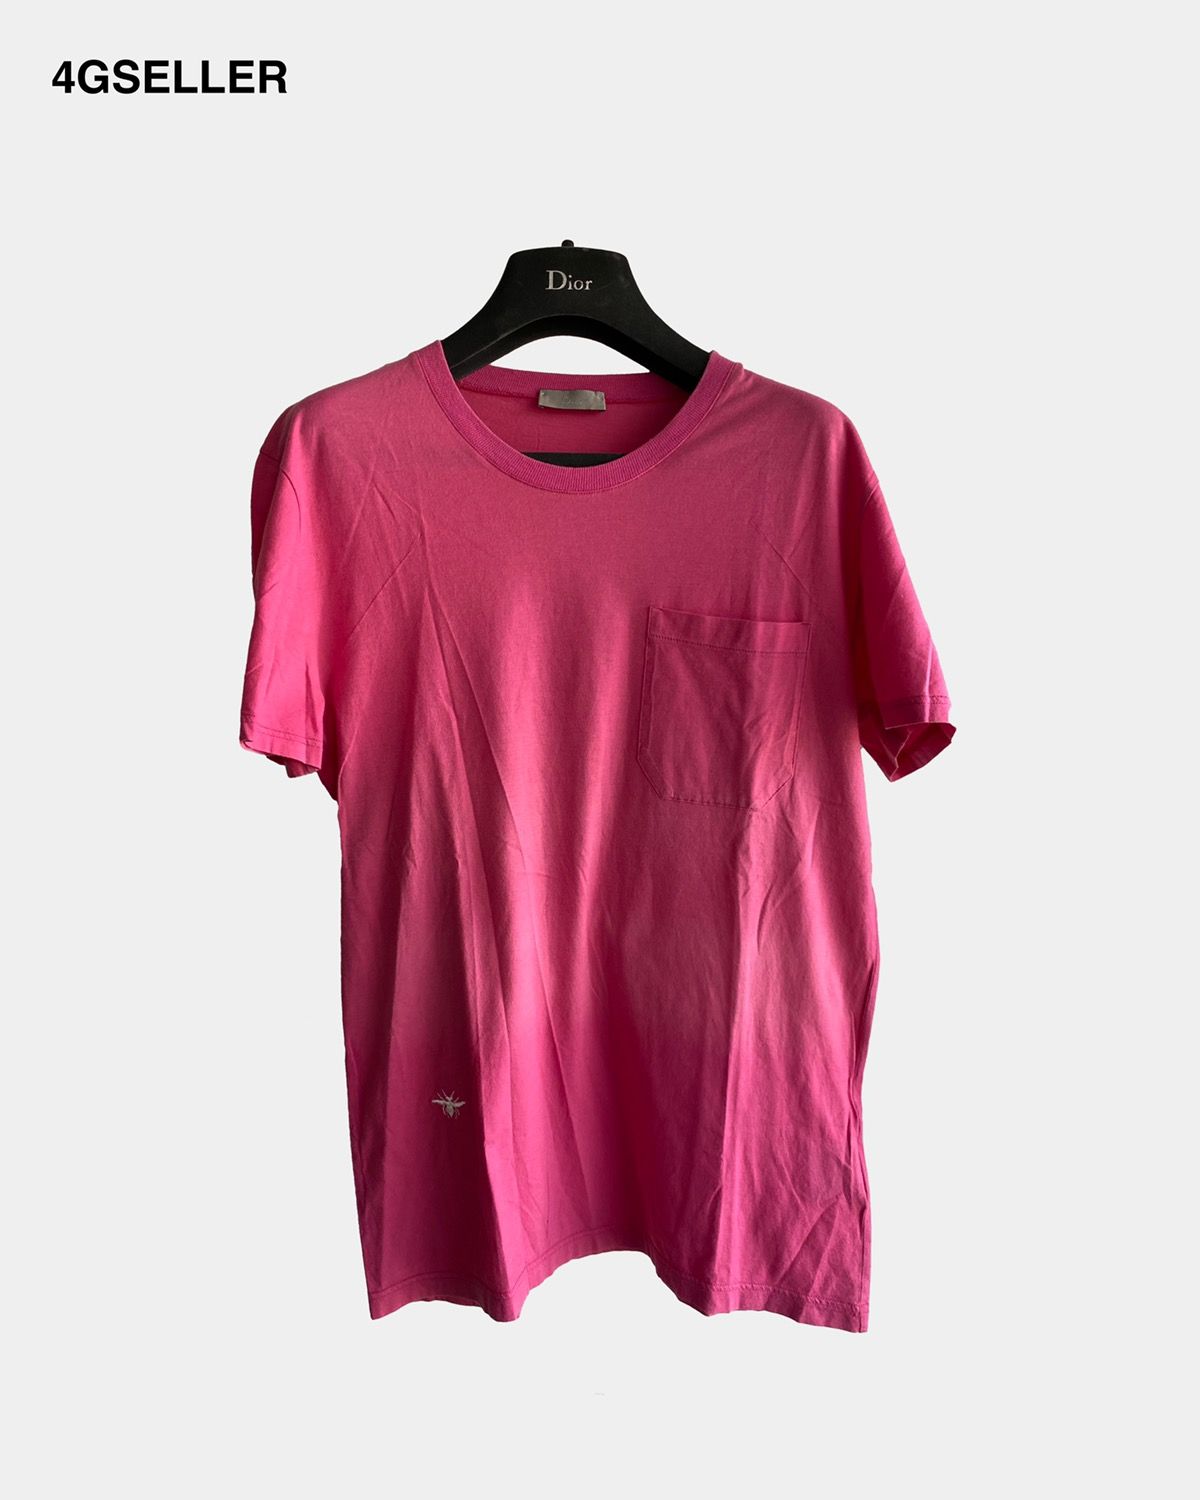 Dior Homme 06 Hedi Pink BEE Shirt XS S